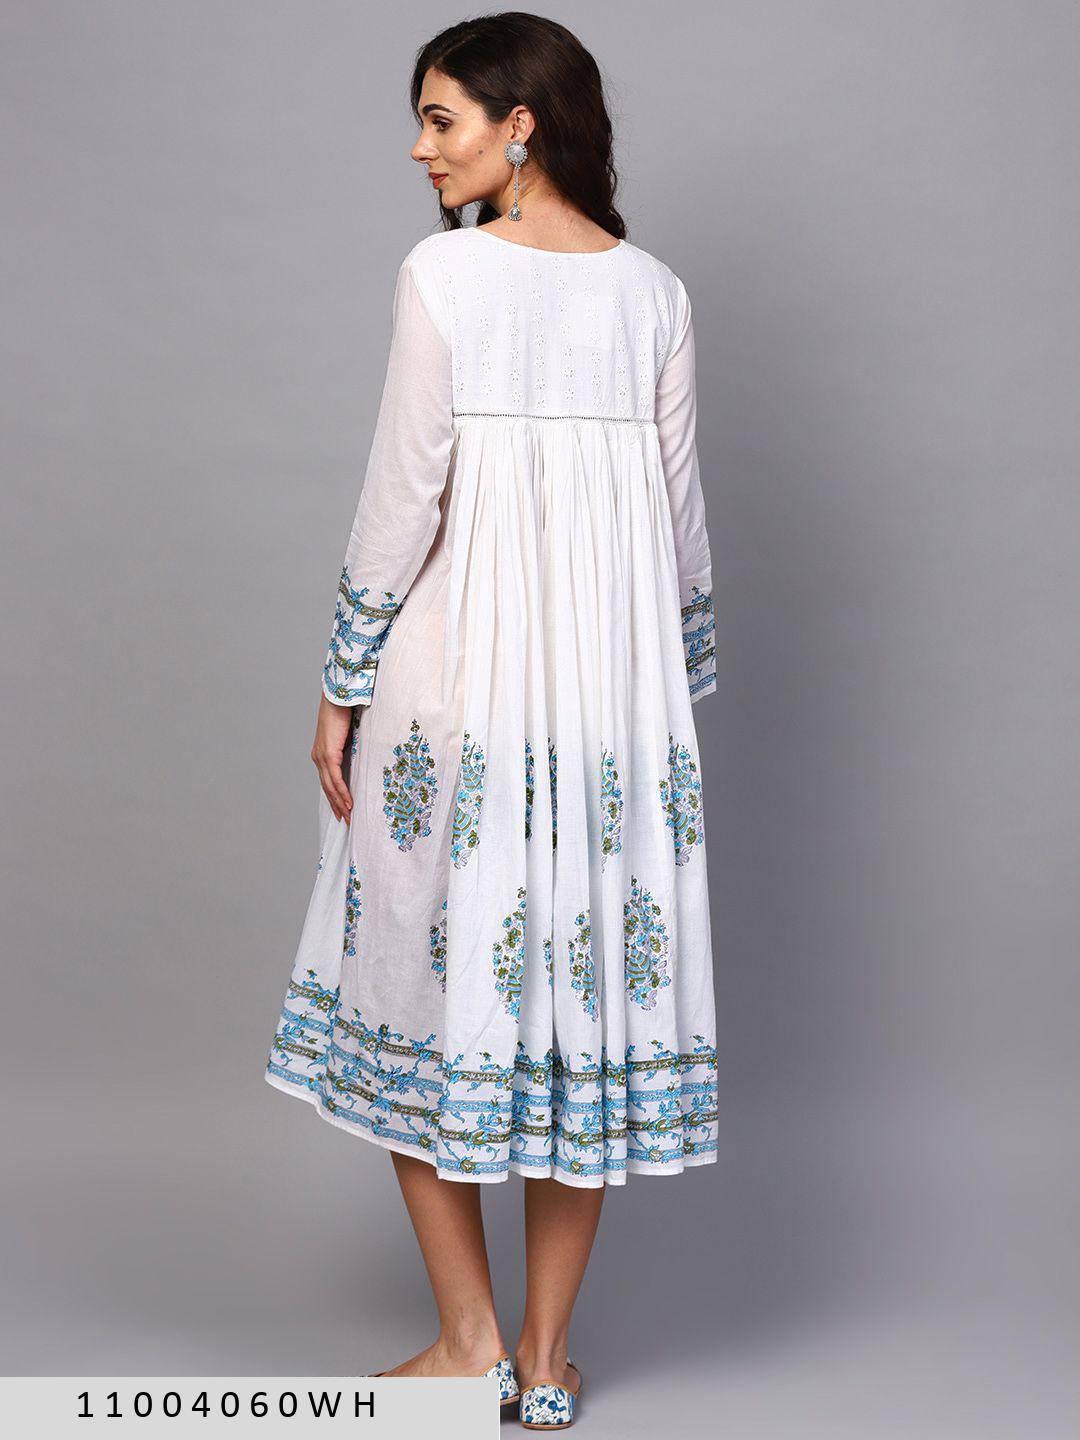 white-blue-floral-printed-flared-dress-11004060WH, Women Clothing, Cotton Dress